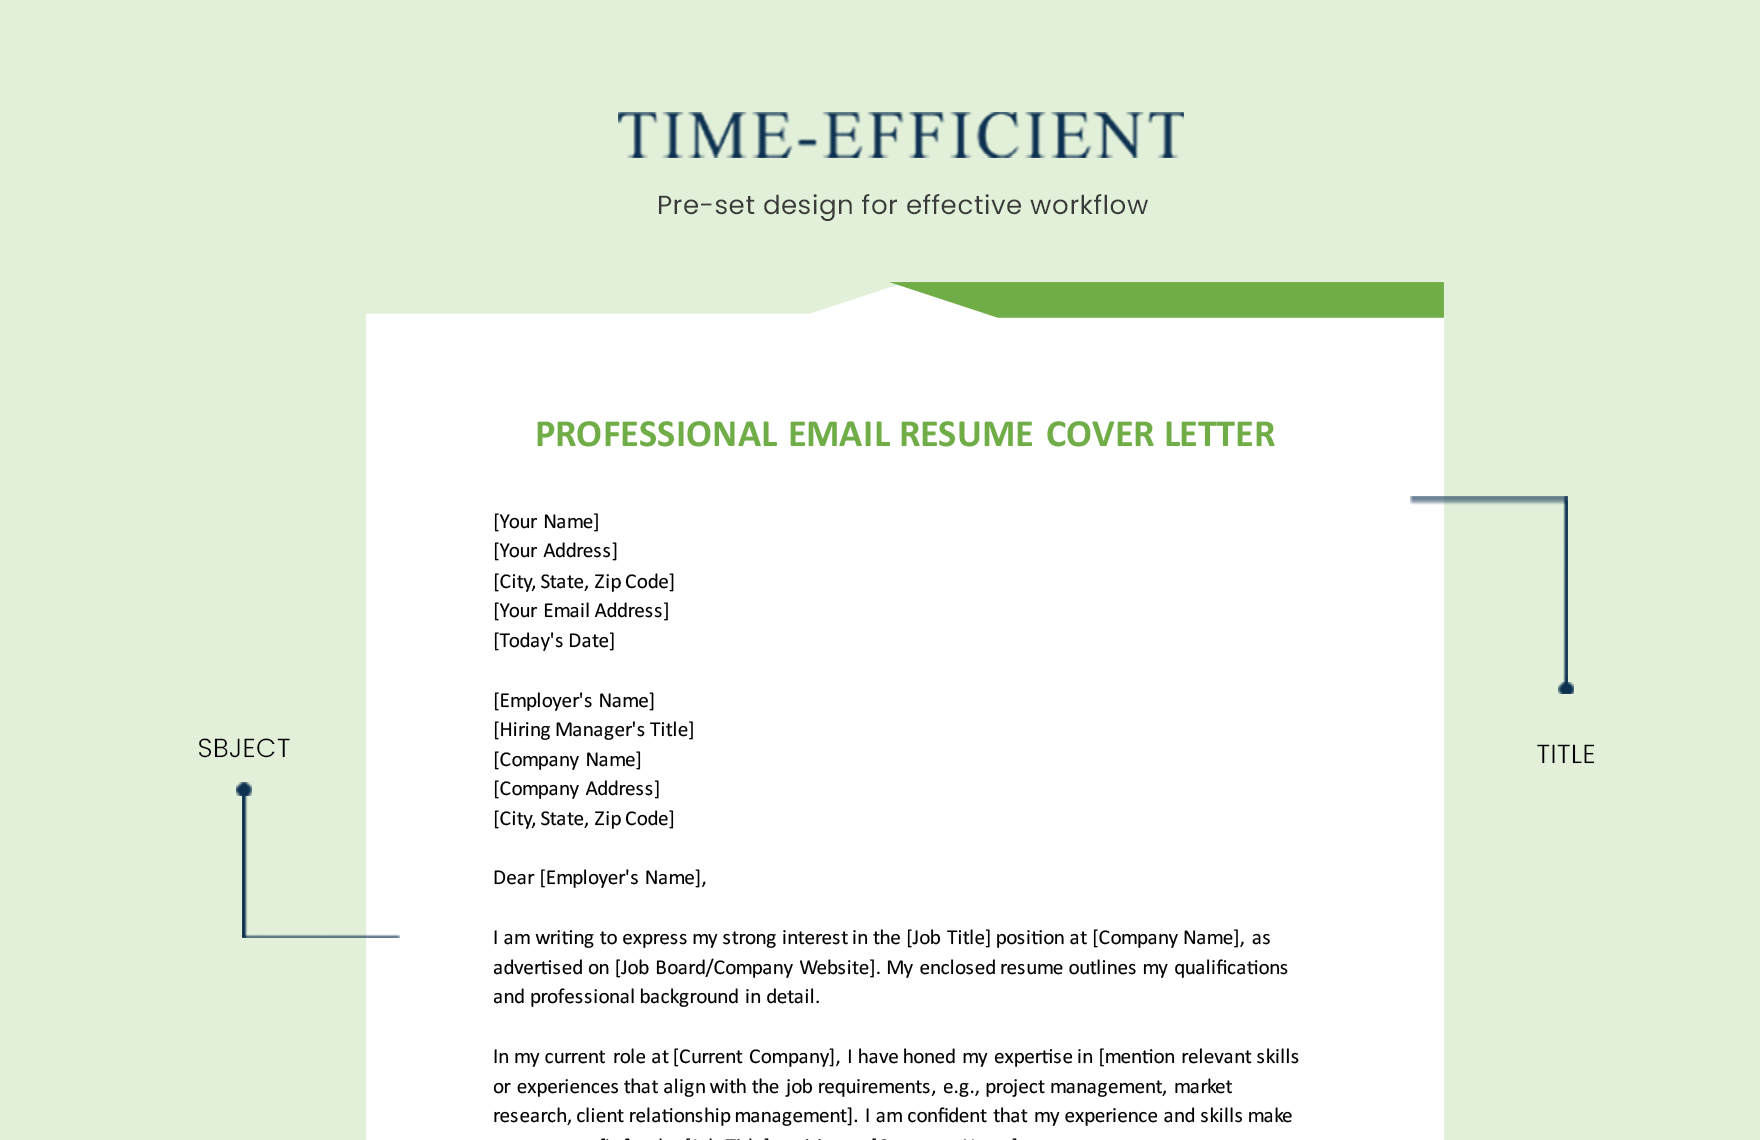 Professional Email Resume Cover Letter Template